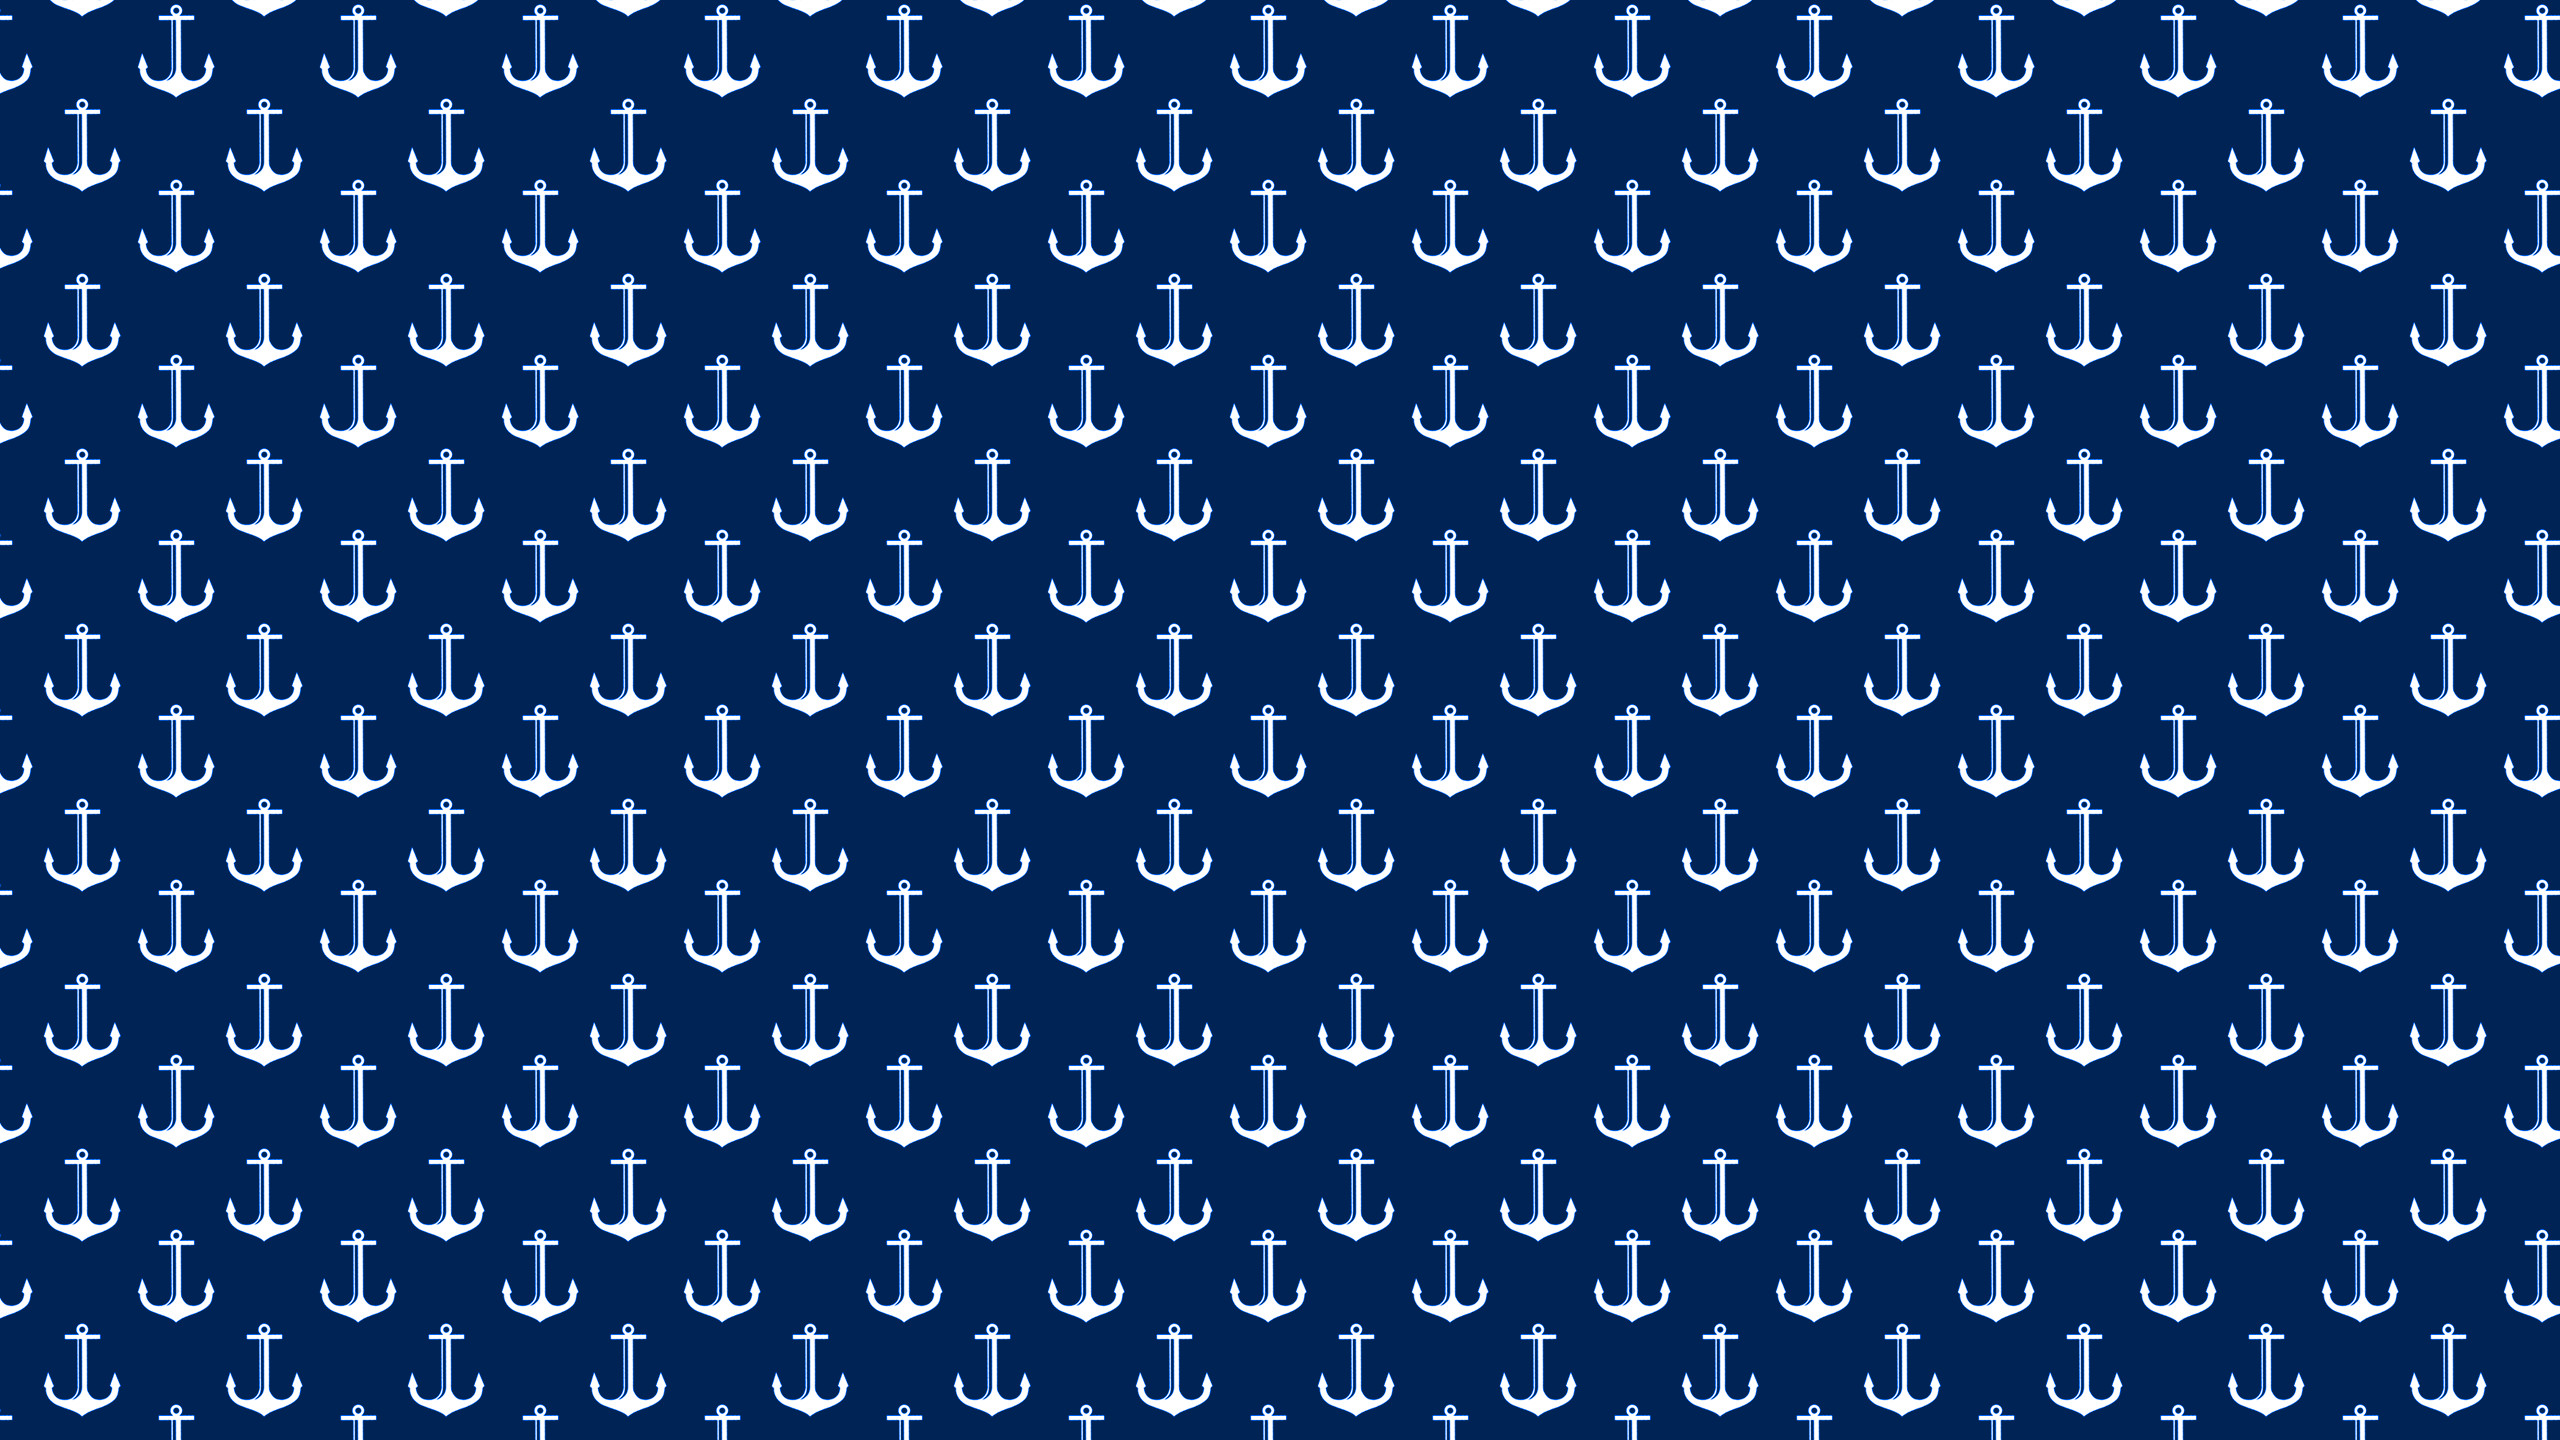 2560x1440 Navy Blue Anchors Desktop Wallpaper is easy. Just save the wallpaper .